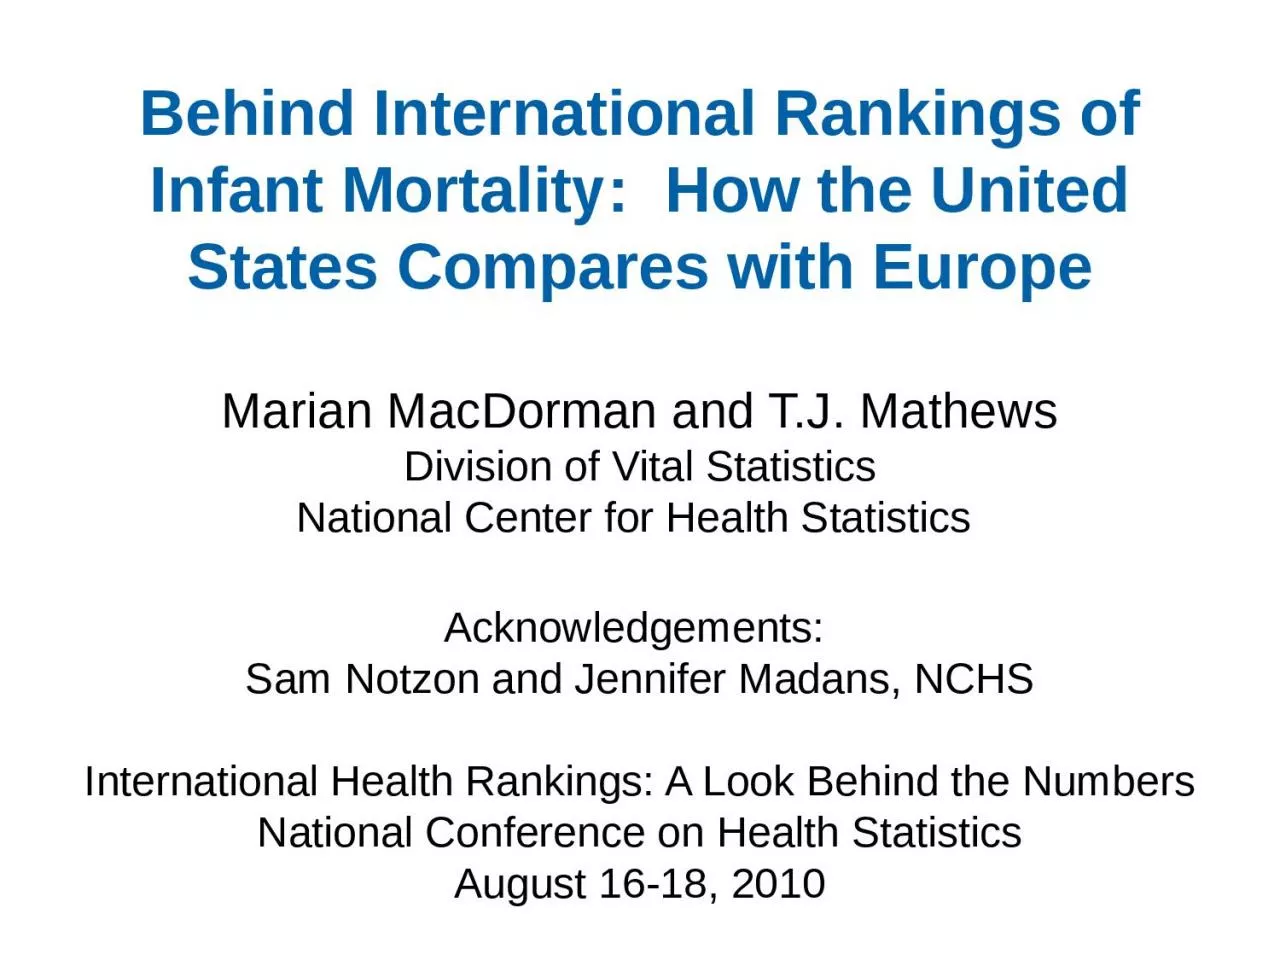 Behind International Rankings of Infant Mortality:  How the United States Compares with